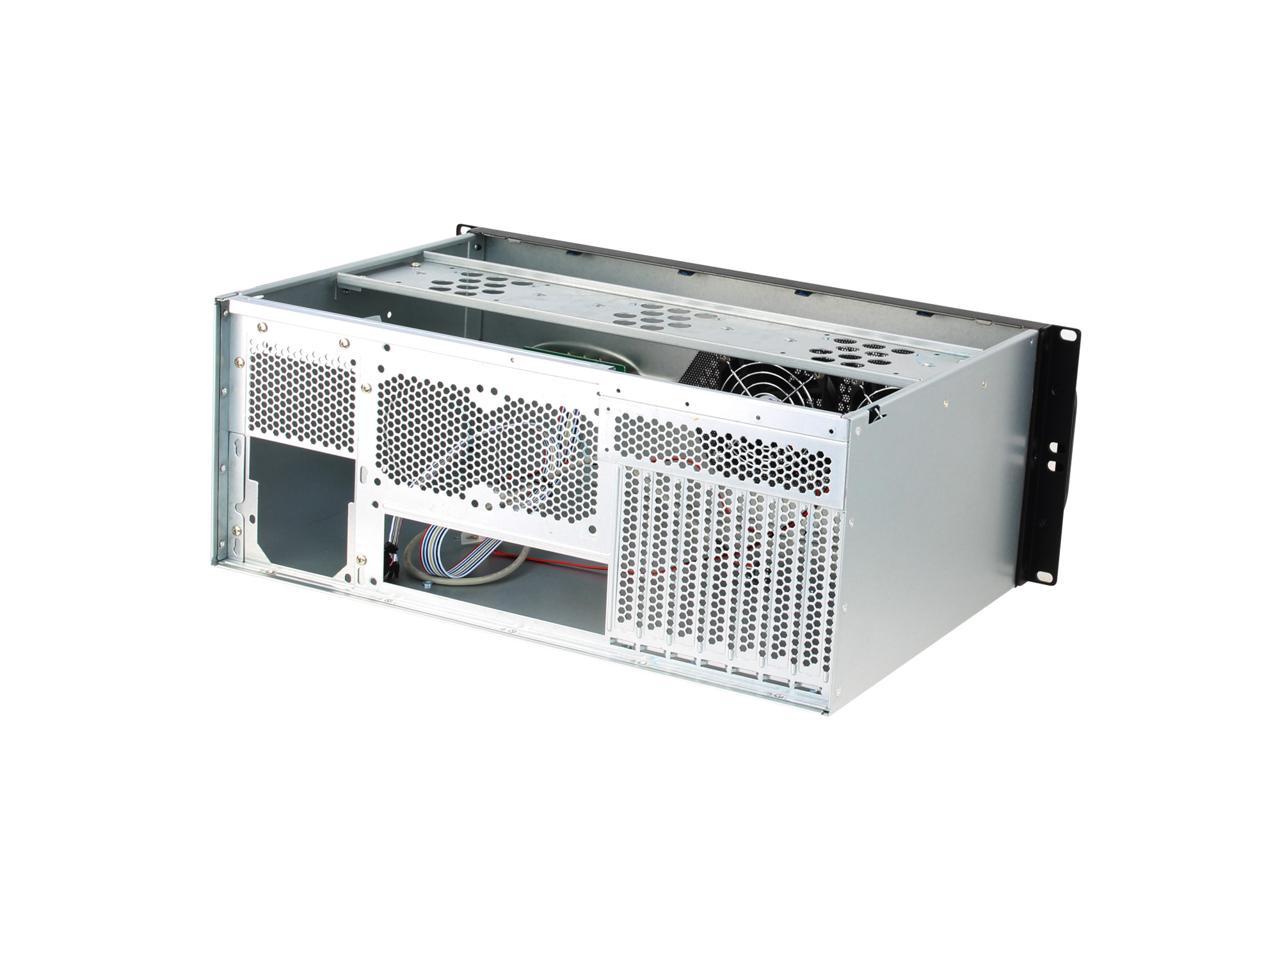 4U300 Server Chassis Compatible Motherboard: Standard Atx Following Motherboard Size: L300*W437.5*H176.5Mm Empty Chassis